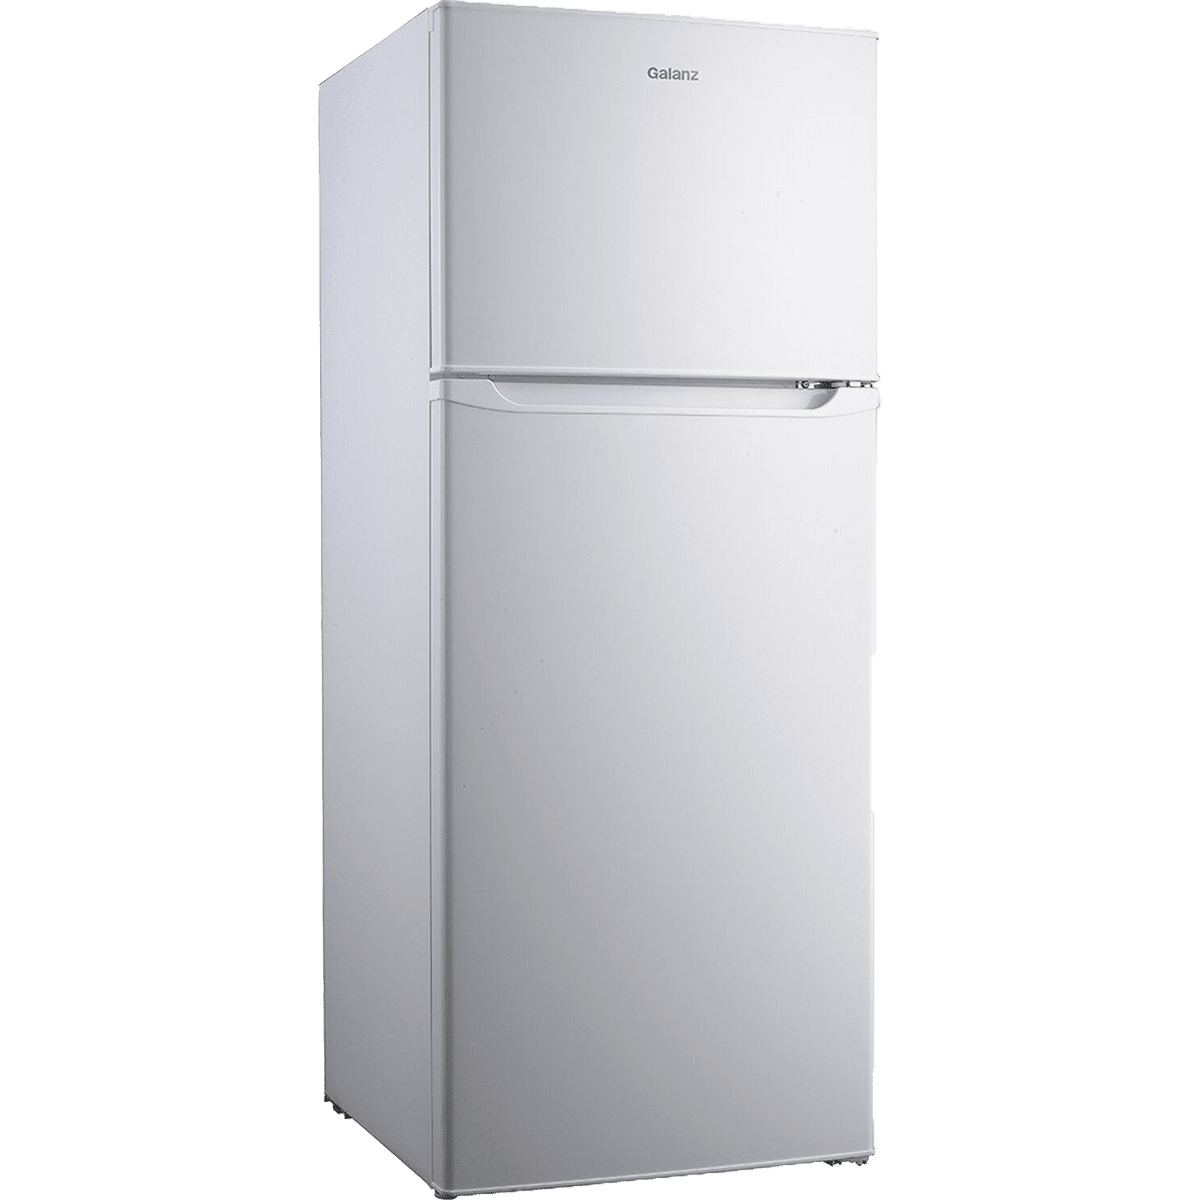 Galanz 7.6 Cu. Ft. Top Mount Compact Refrigerator  - White - Primary View